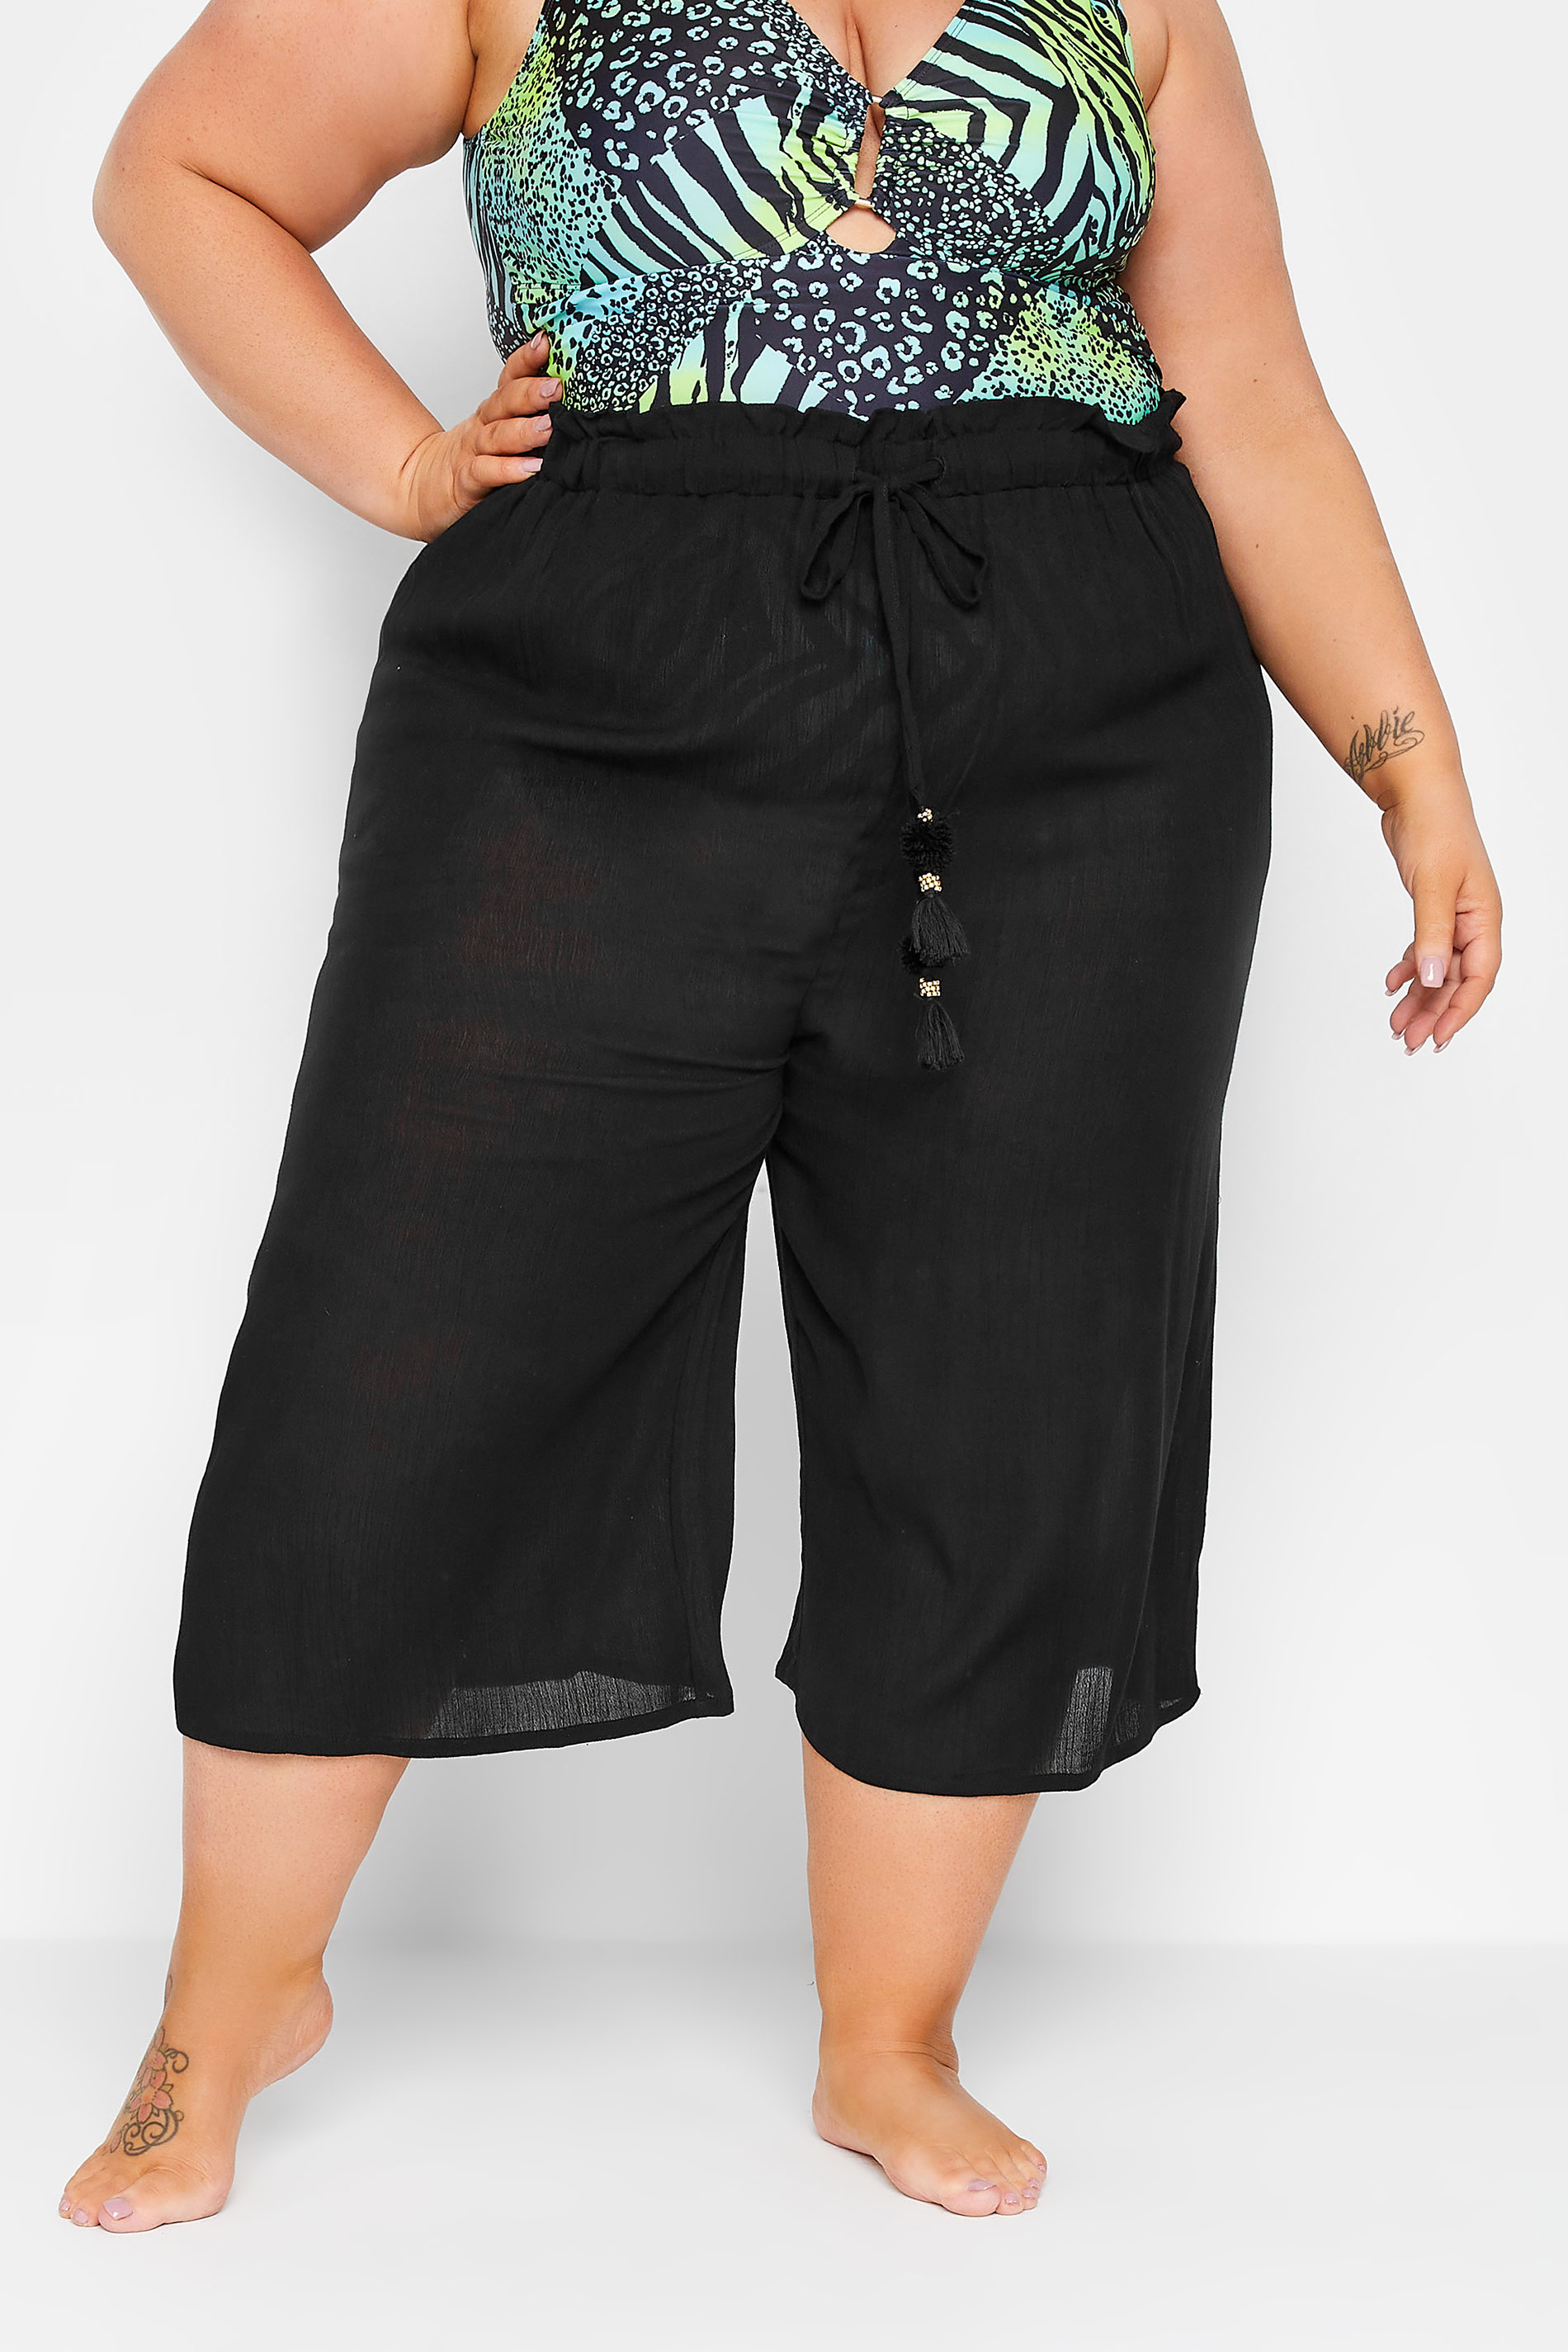 YOURS Plus Size Black Tassel Detail Wide Leg Beach Culottes | Yours Clothing 1